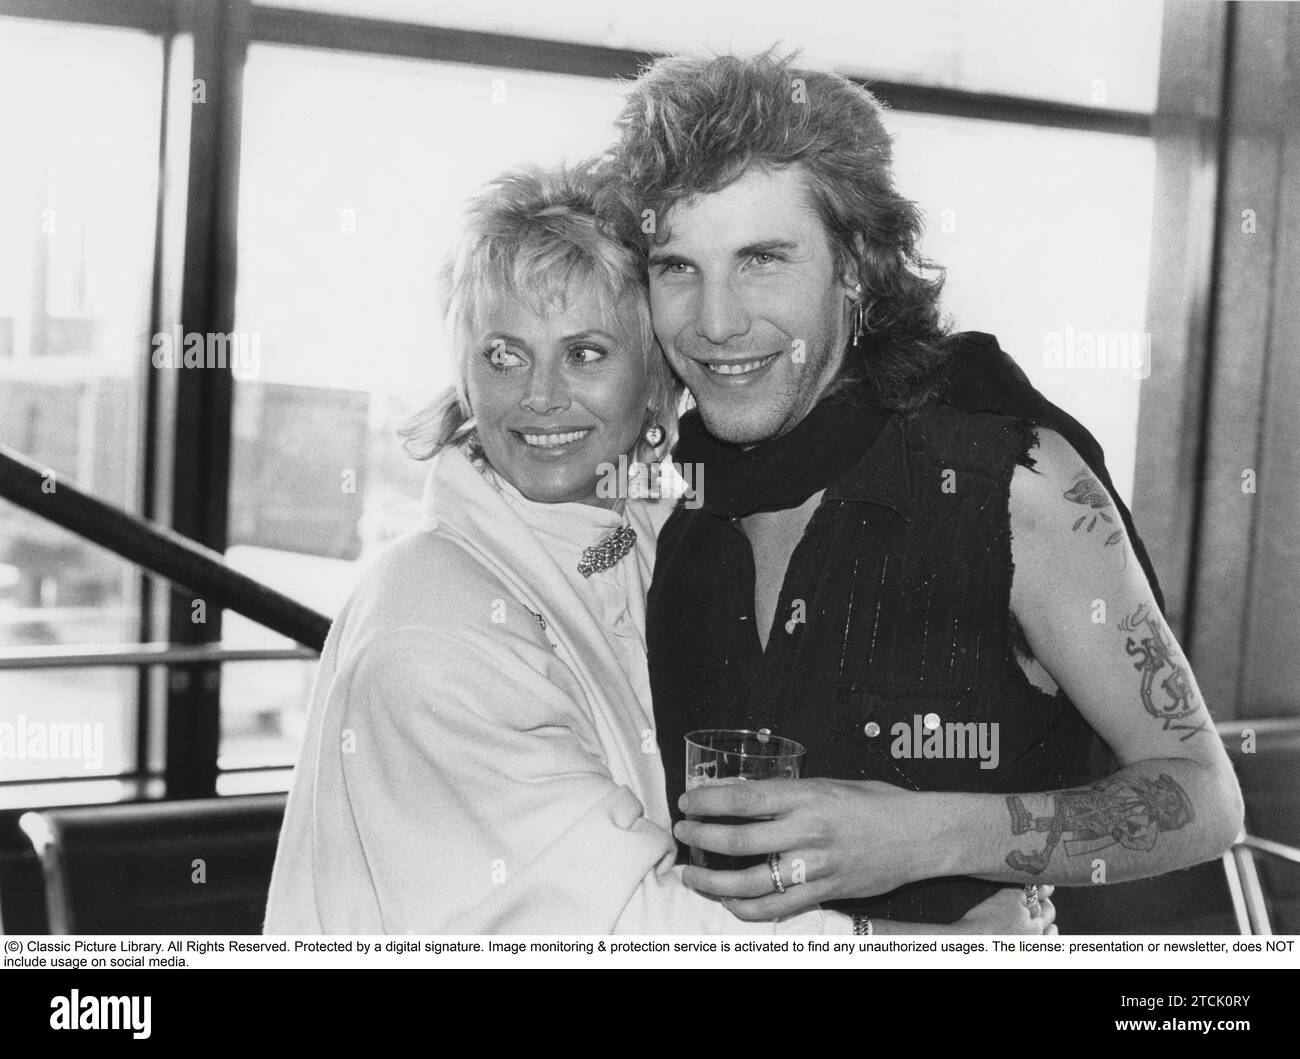 Britt Ekland. Swedish actress, famous for her role as the Bond girl Mary Goodnight in the feature film The man with the golden gun with Roger Moore as James Bond. Here with husband Slim Jim Phantom, with whom she was married between the years 1984 to 2003. 1986 Stock Photo